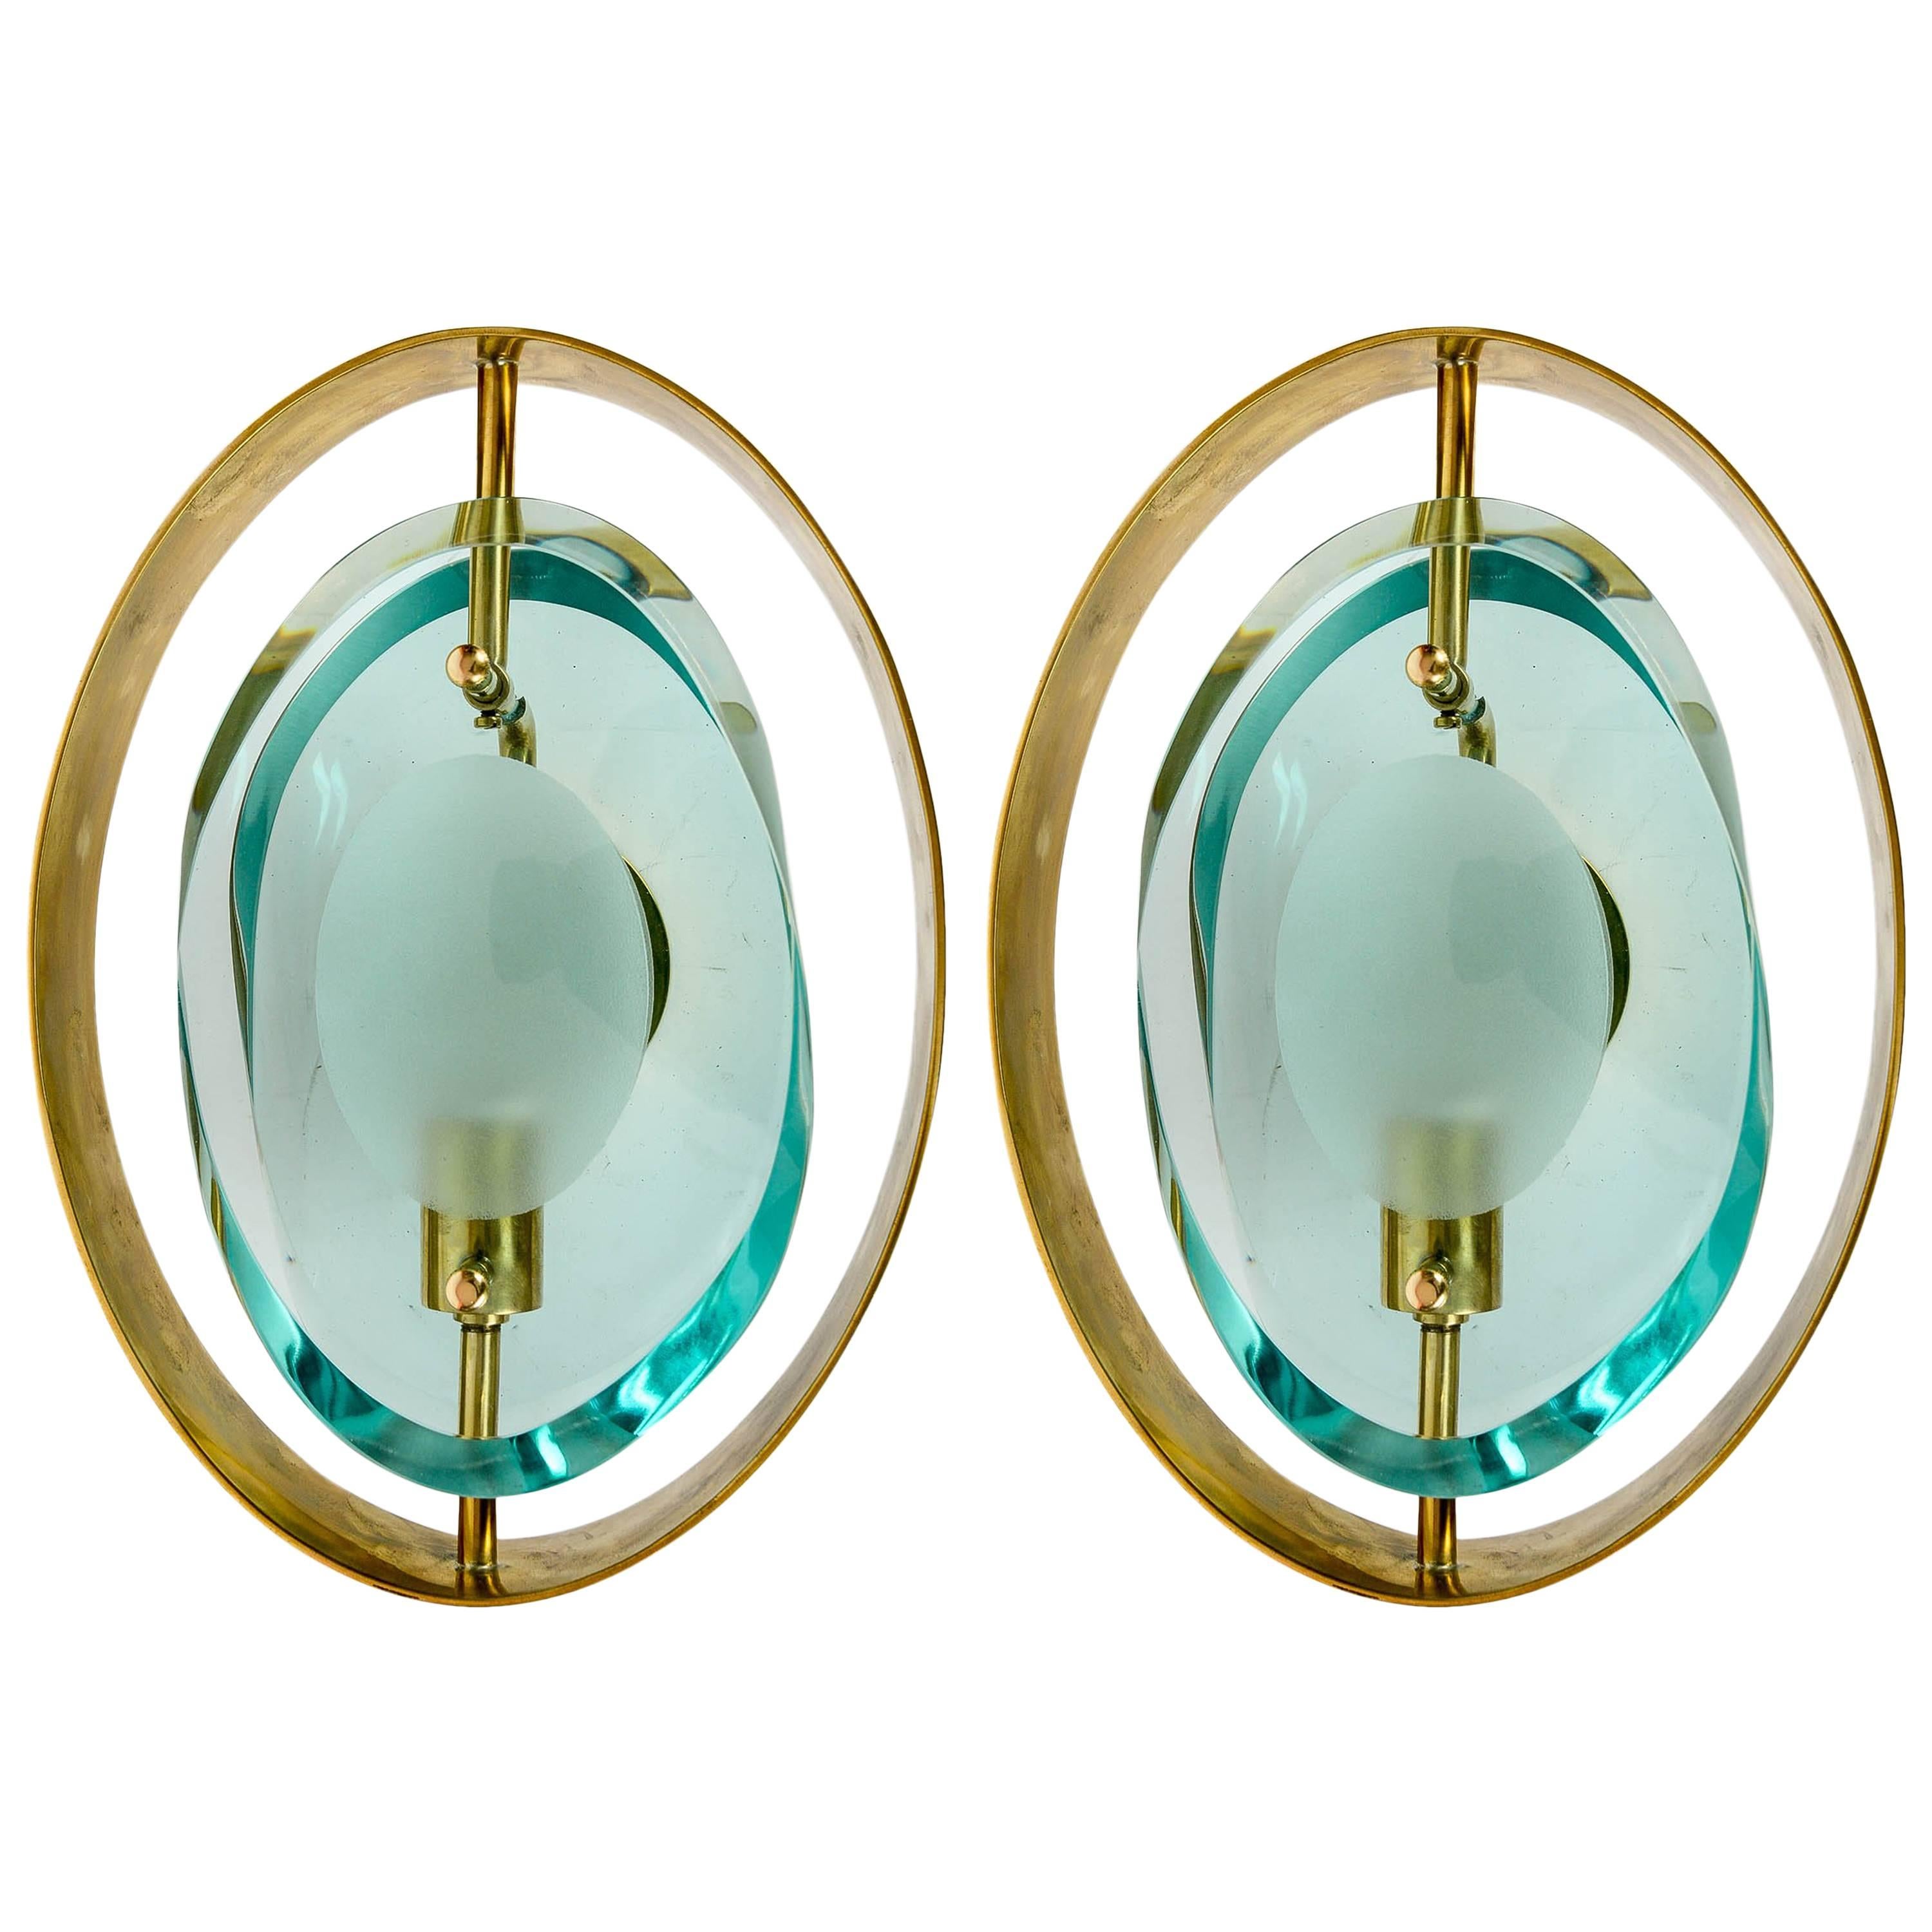 Pair of Sconces in the style of Max Ingrand Modèle 2020